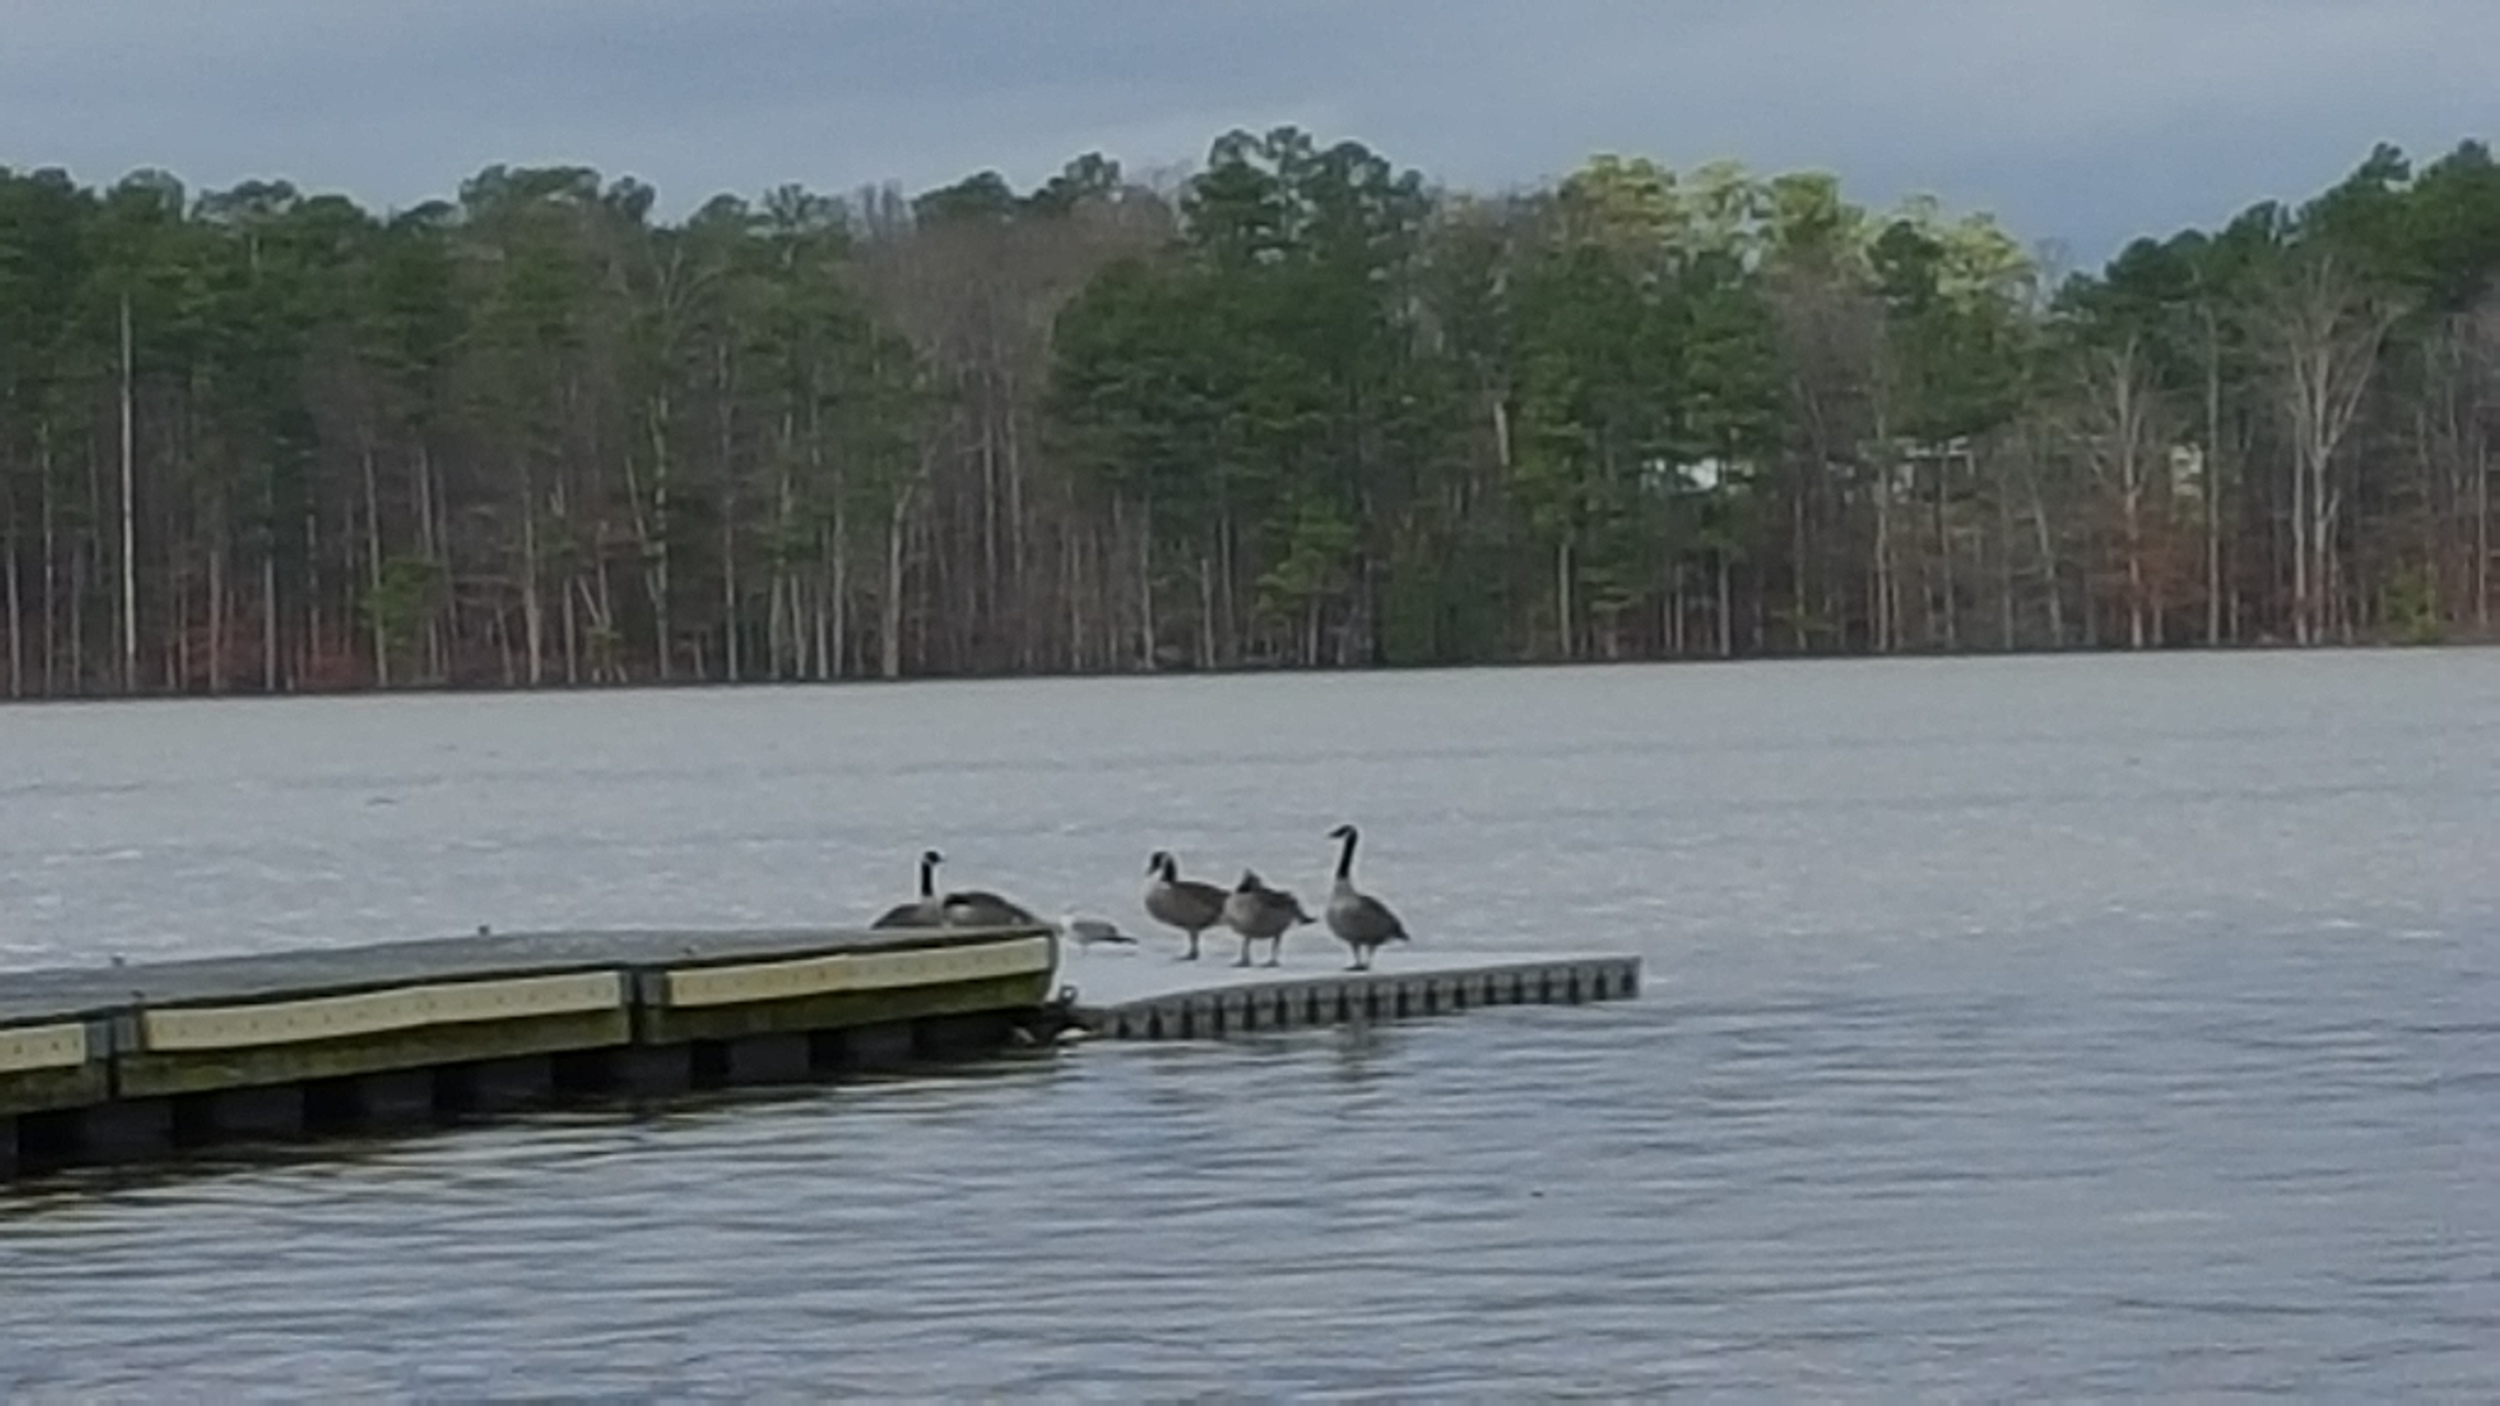  The geese have dry feet while the rowers have to wet-launch 